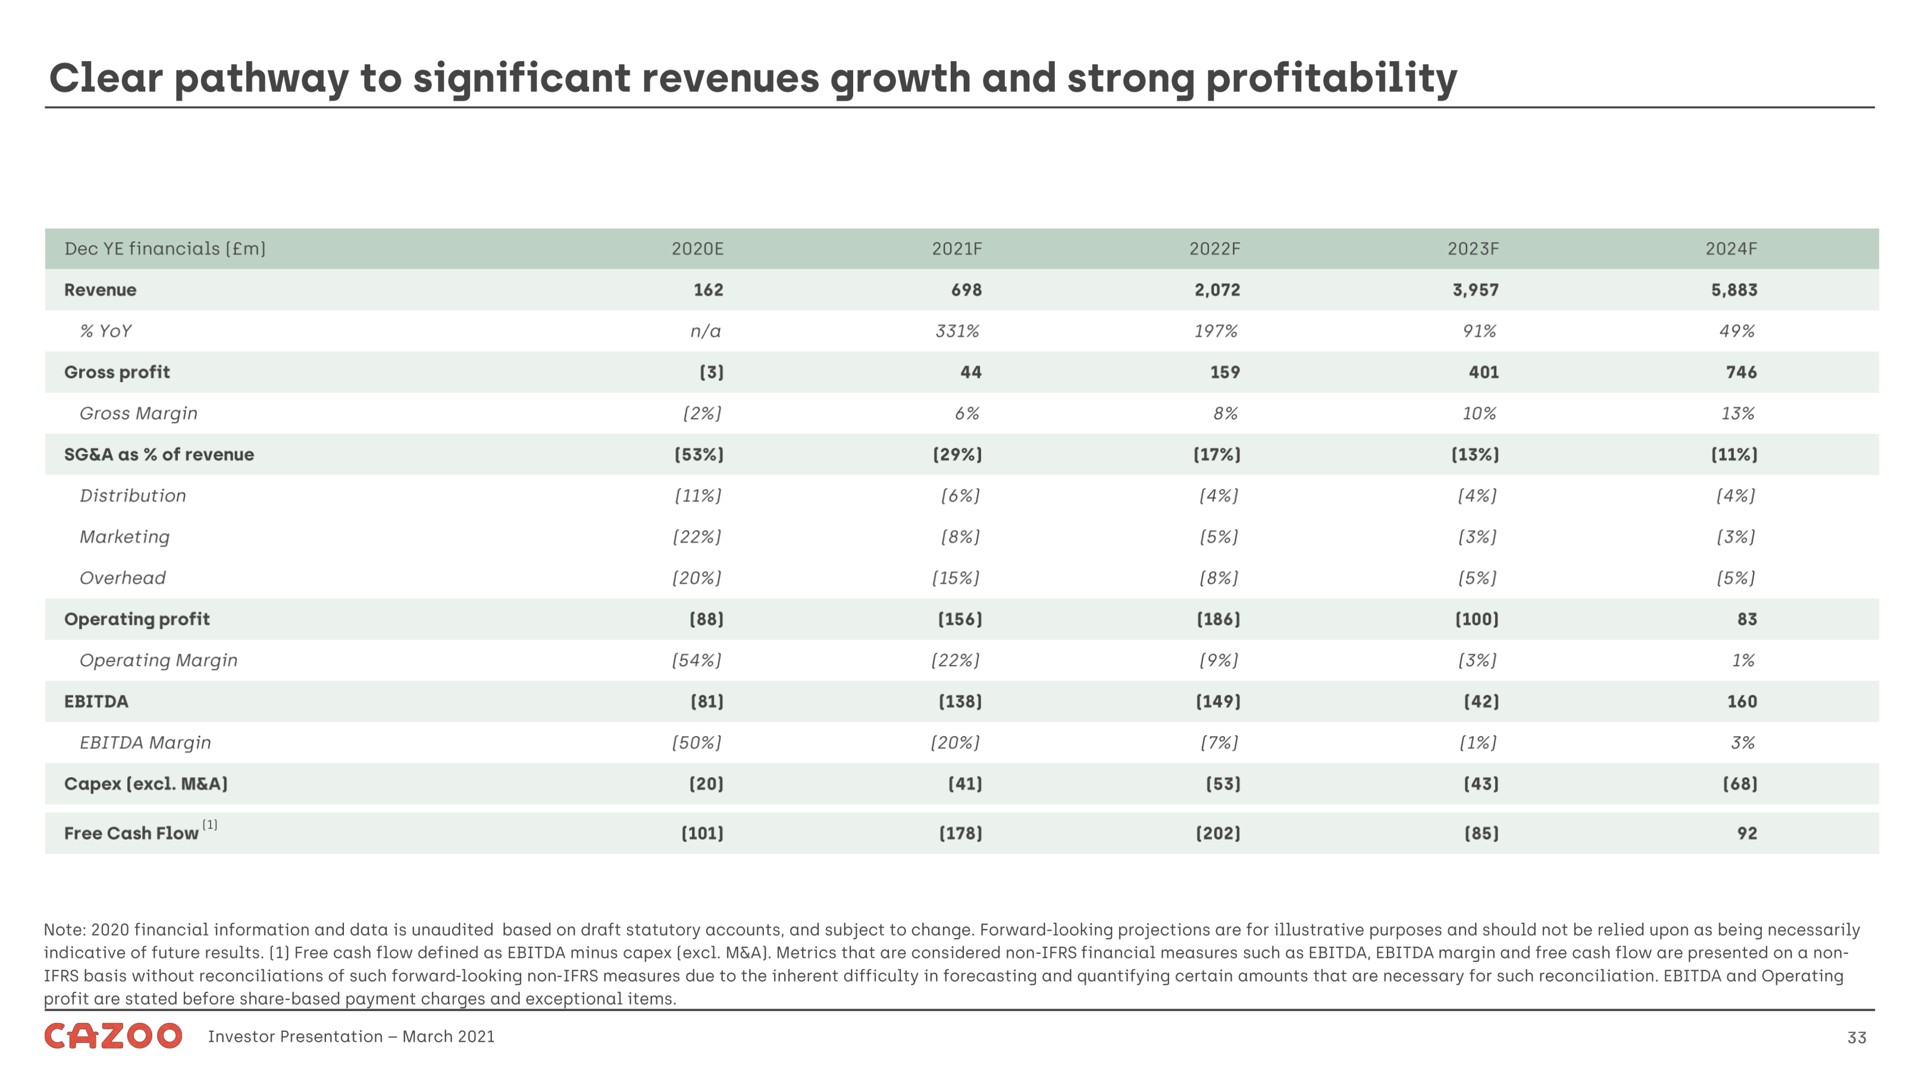 clear pathway to significant revenues growth and strong profitability | Cazoo